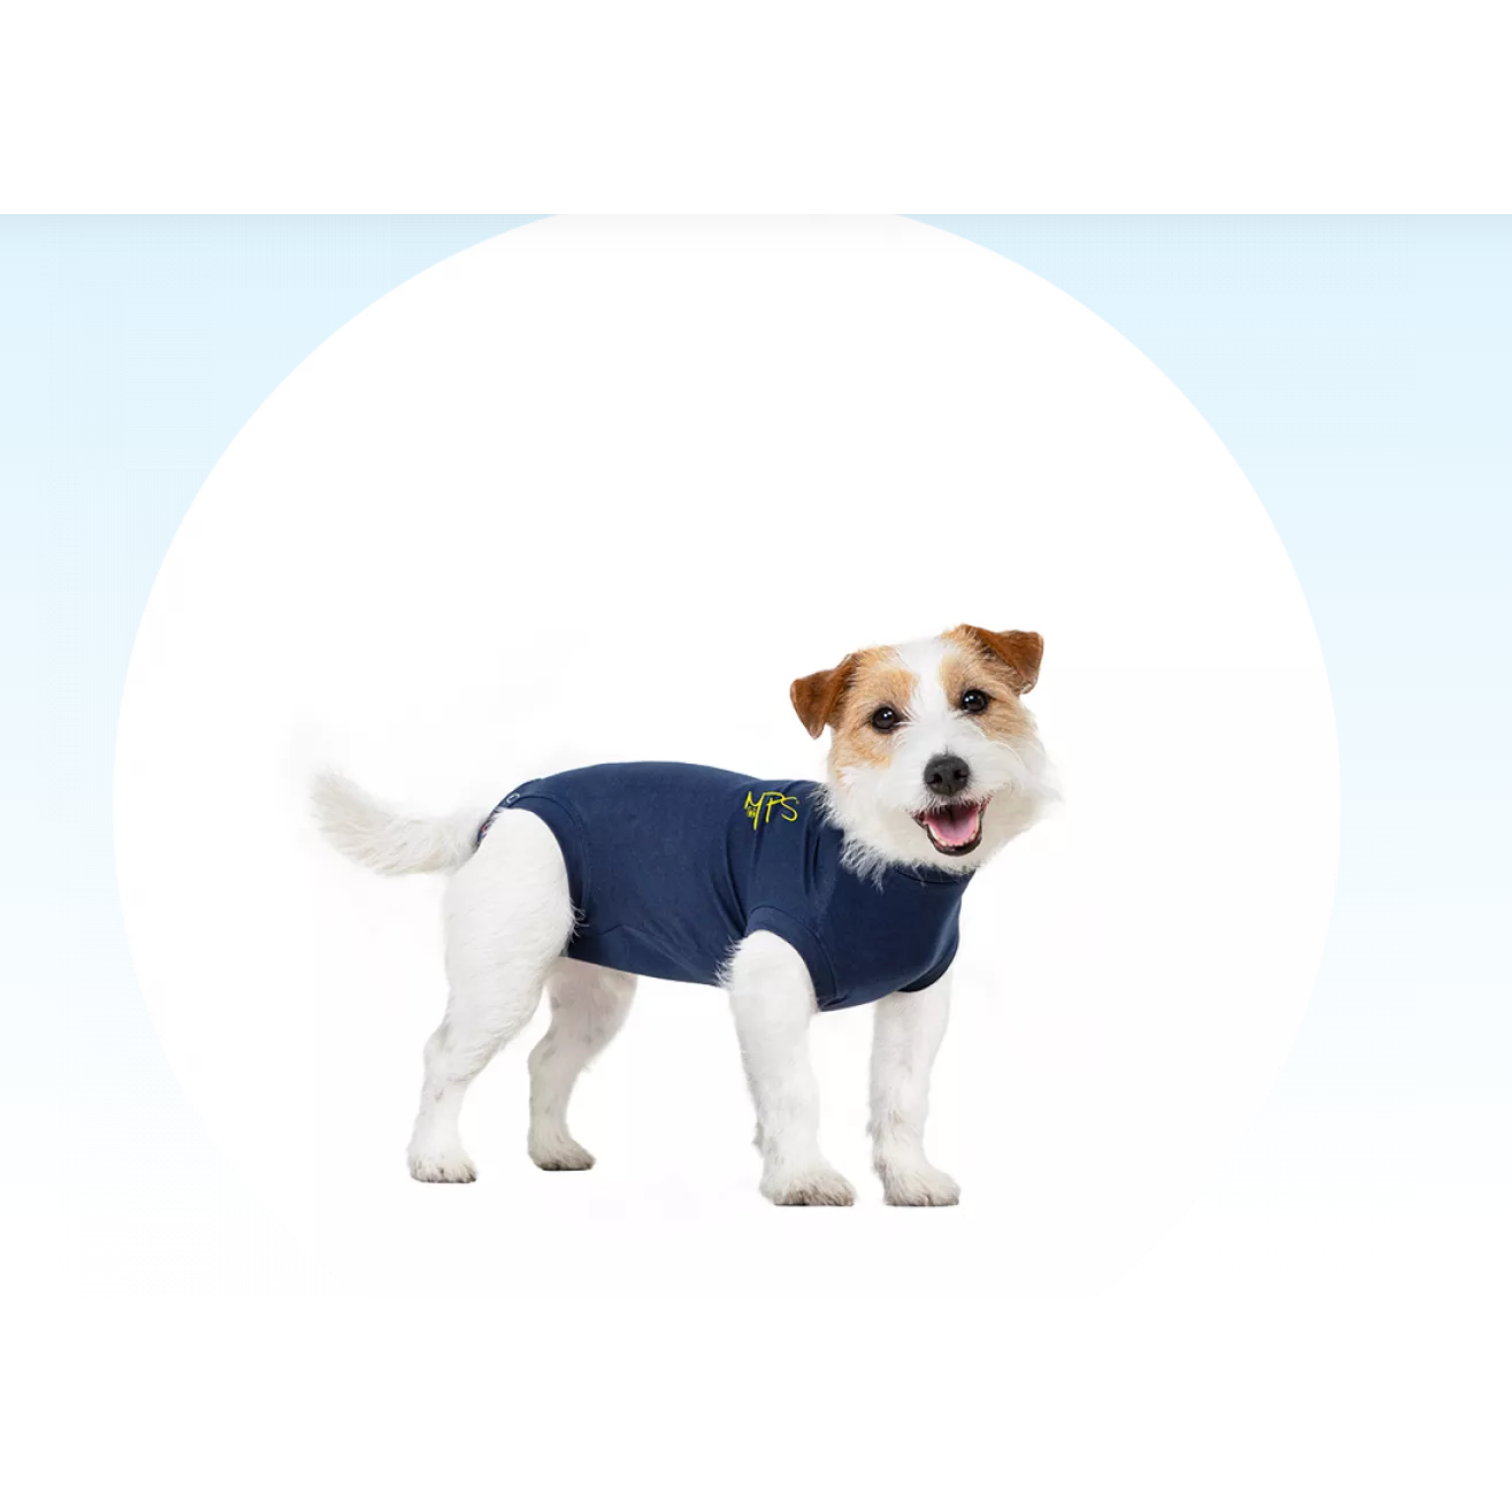 Medical Pet Shirts - Covering and protective products for pets.